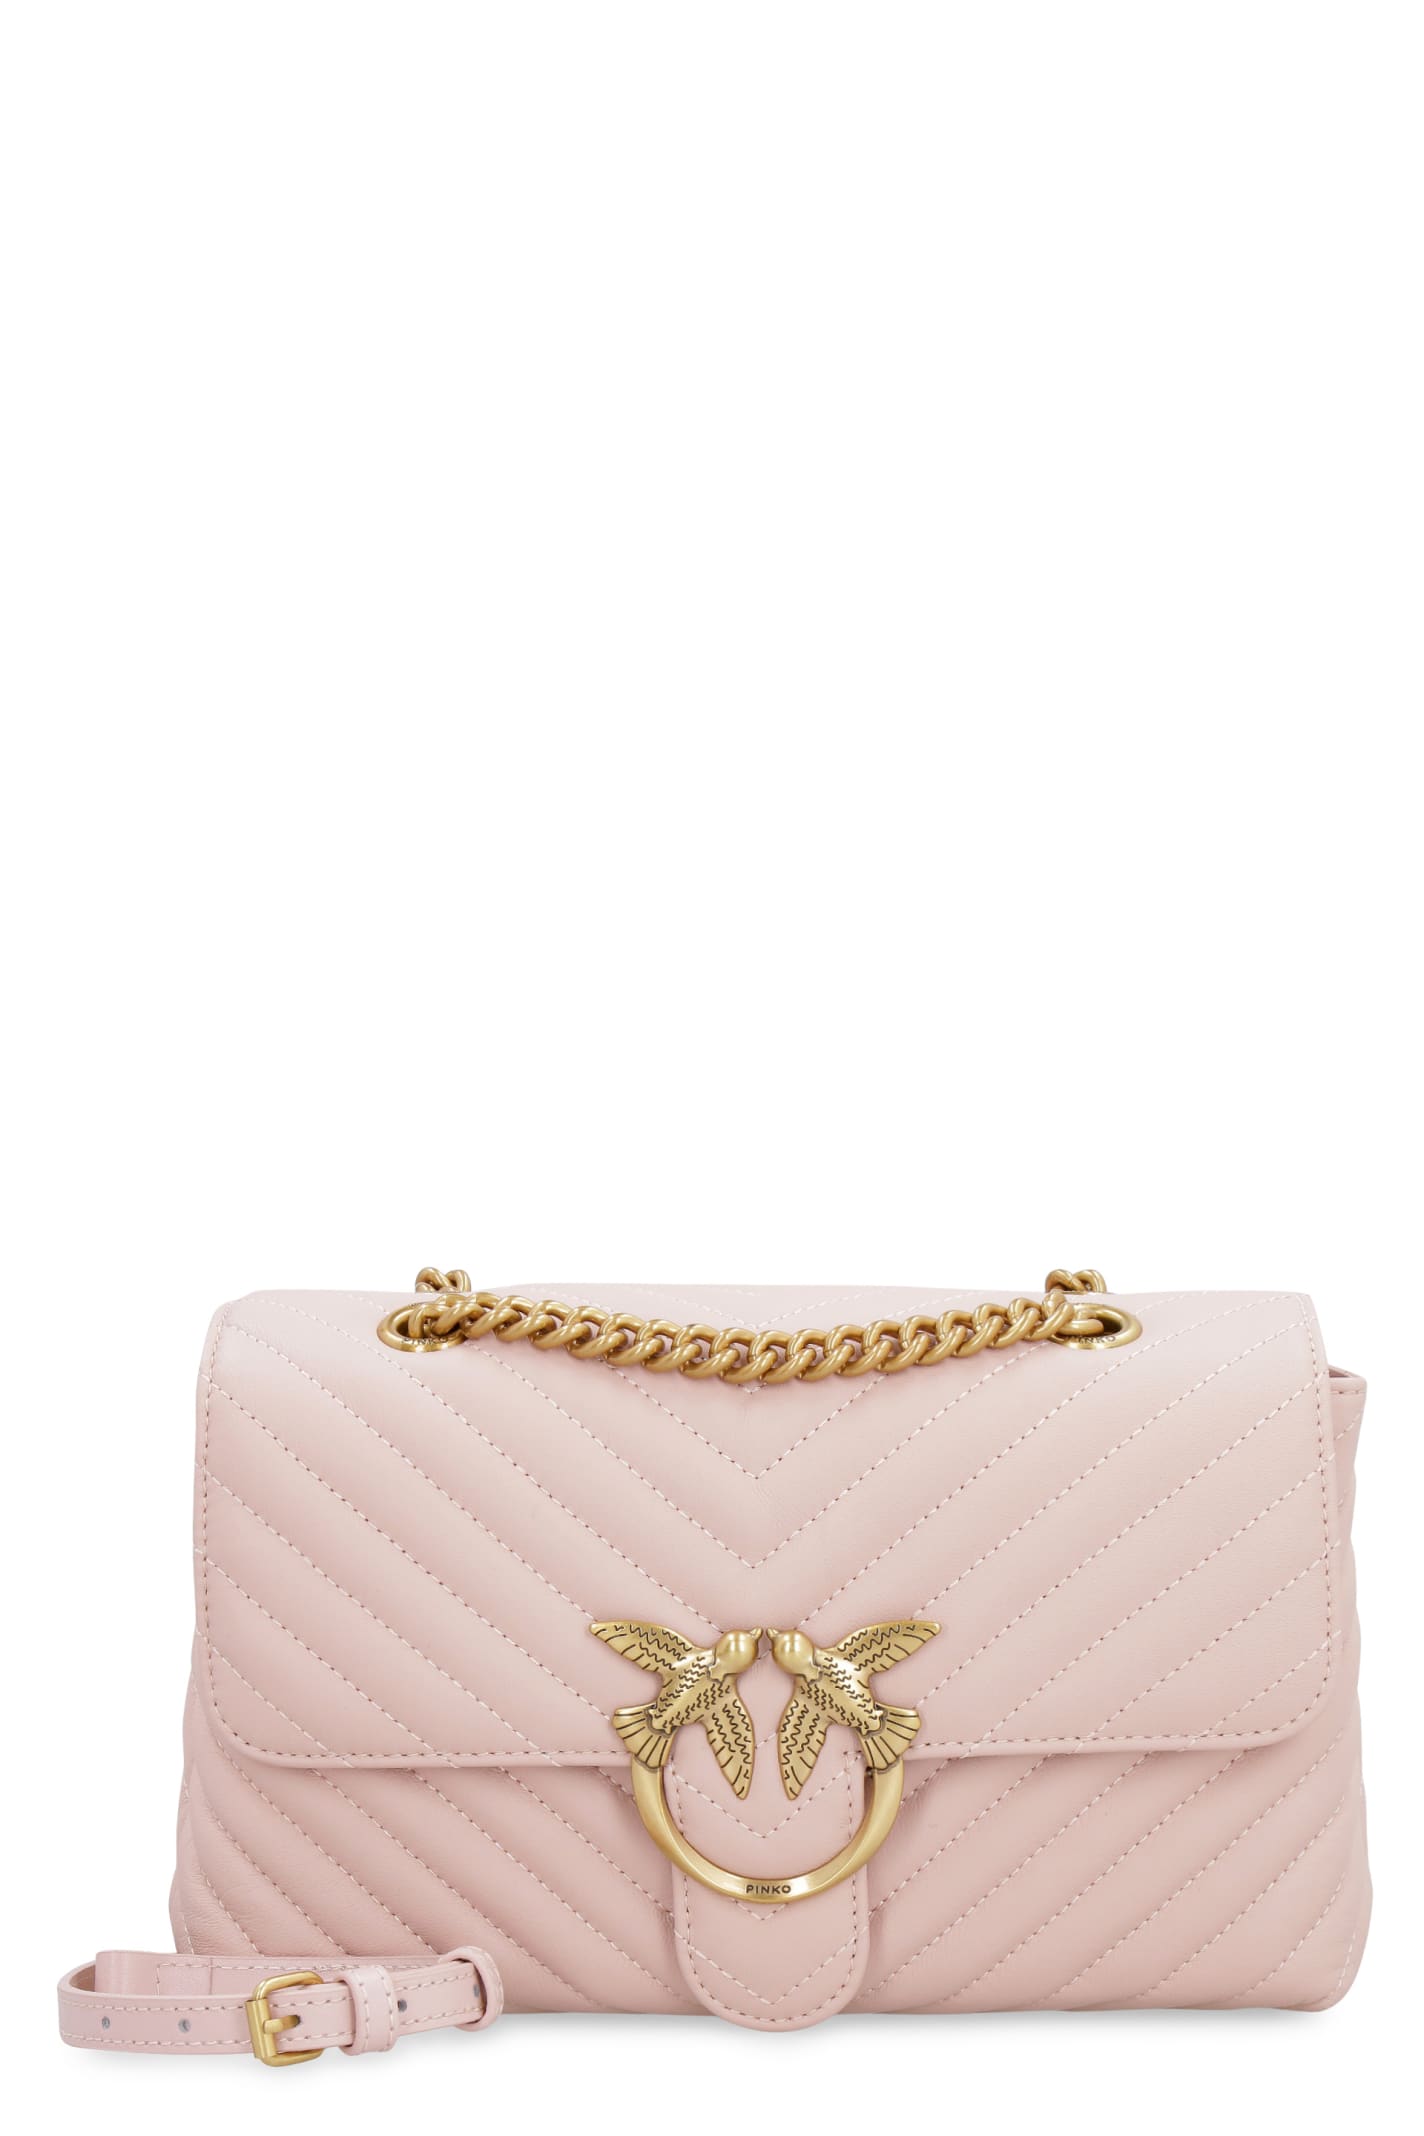 Pinko Love Lady Puff Leather Shoulder Bag